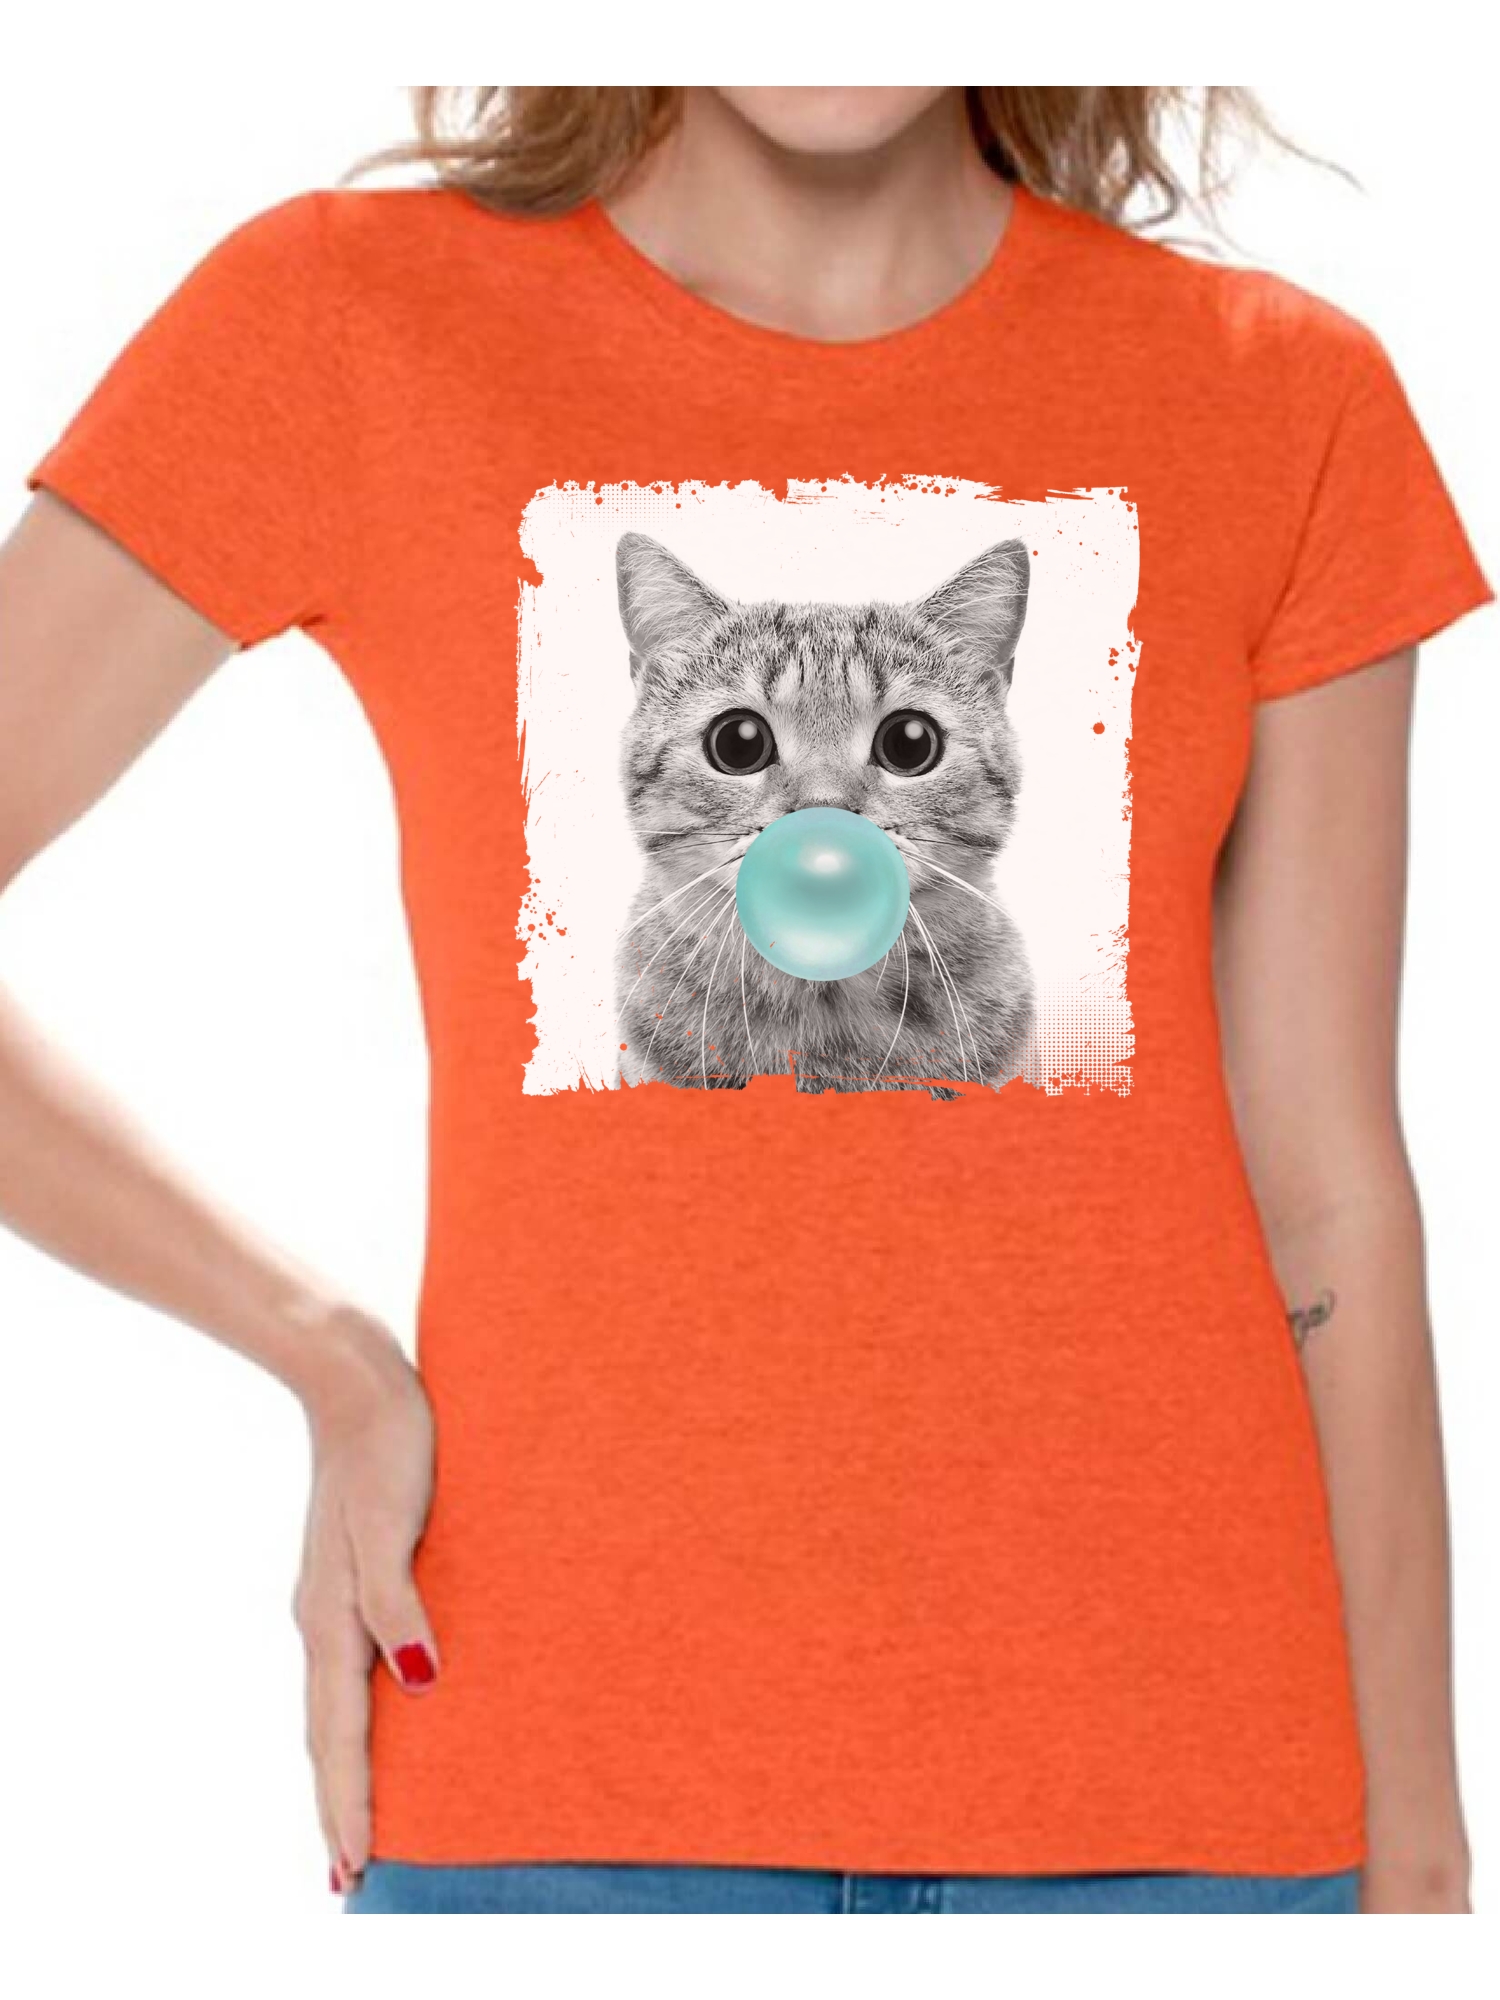 Awkward Styles Funny Animal Clothes Shirt for Woman Lovely Animal Lovers Gifts for Her Cat Clothing Cat T Shirt Cute Animal T Shirt Baby Cat Shirt Women T Shirt Little Cat Blowing Gum T Shirt - image 1 of 4